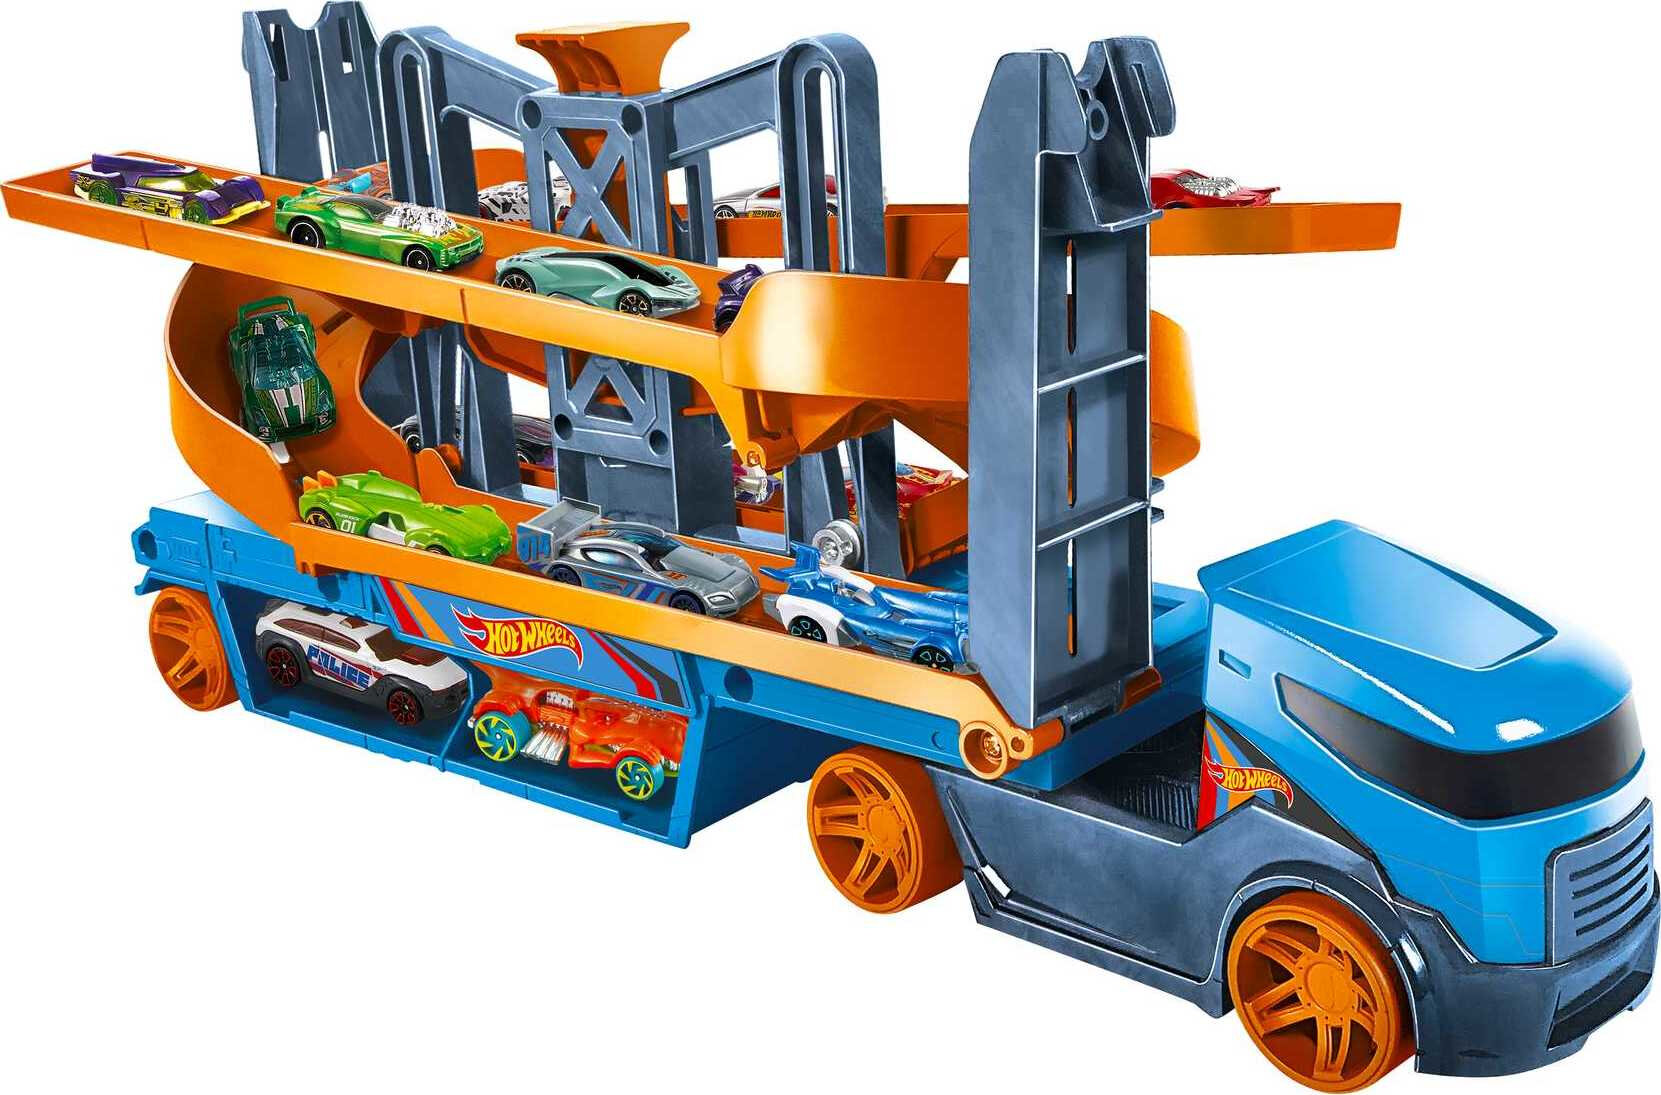 Hot Wheels City Lift & Launch Hauler with 1:64 Scale Toy Car, Stores 20+ Vehicles - image 3 of 6